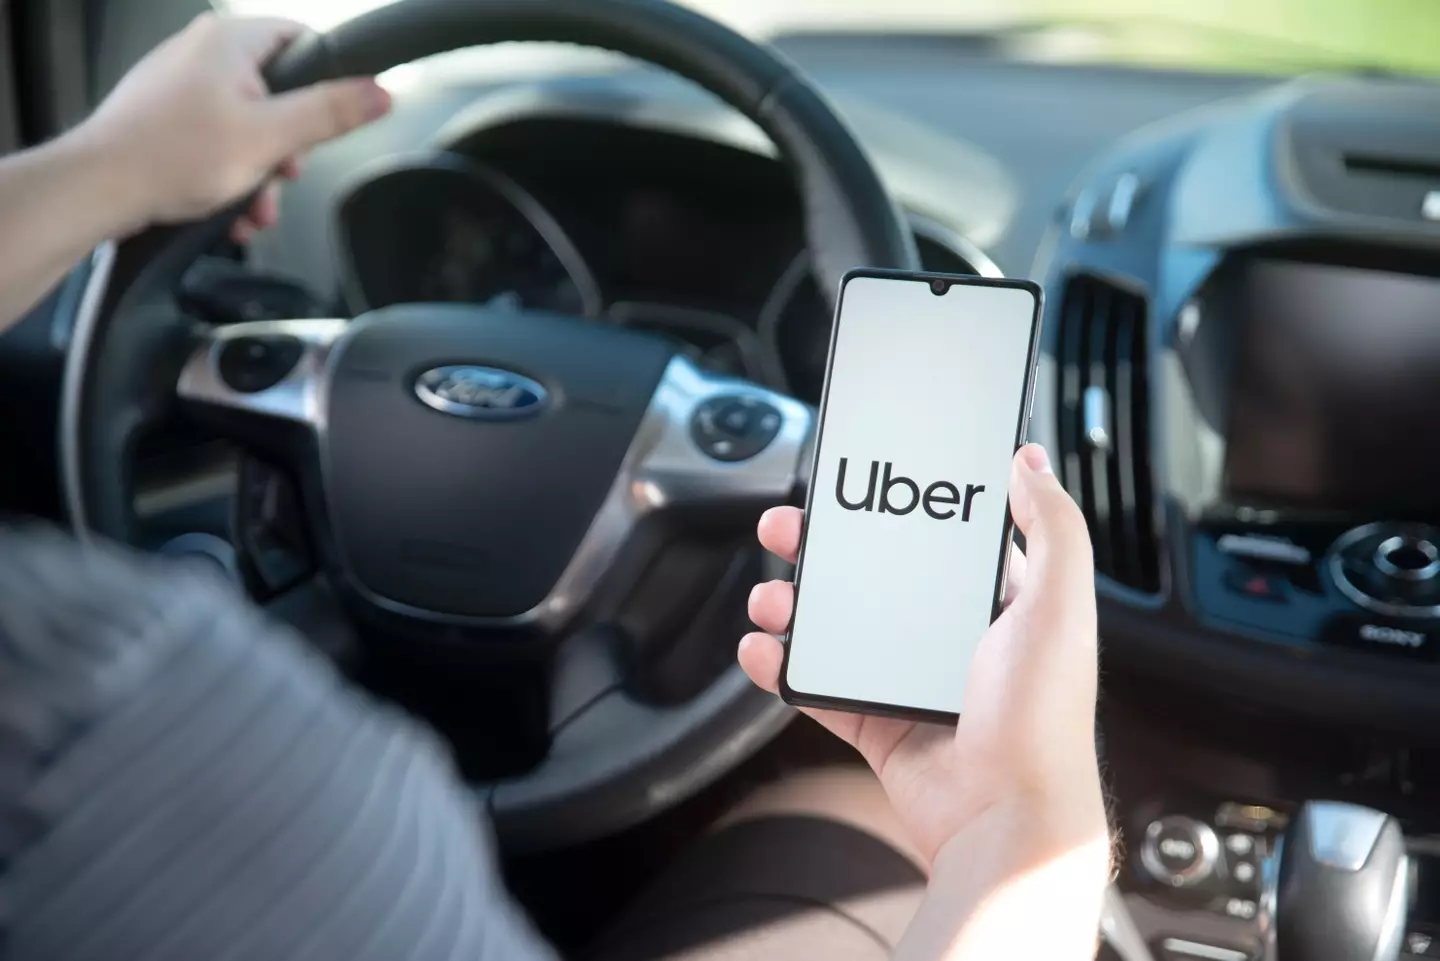 Uber drivers can increase their earnings in a variety of ways.